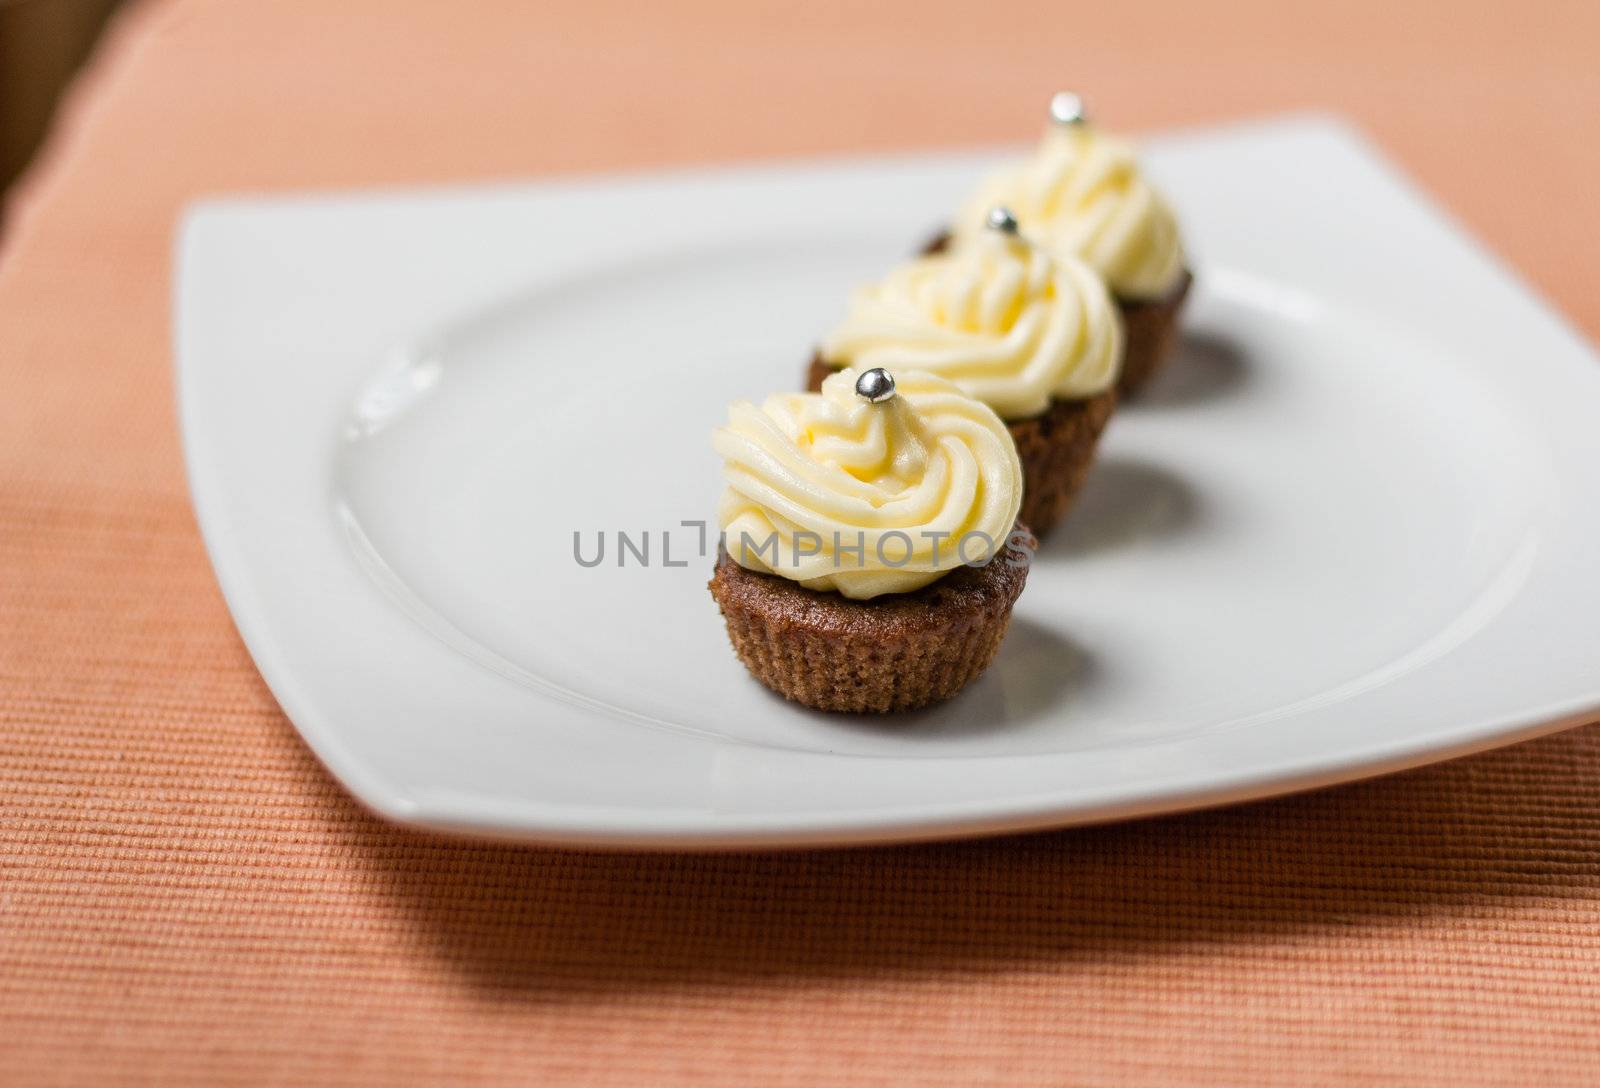 Three chocolate cupcakes with silver sprinkles on top, on white plate and fabric tablecloth